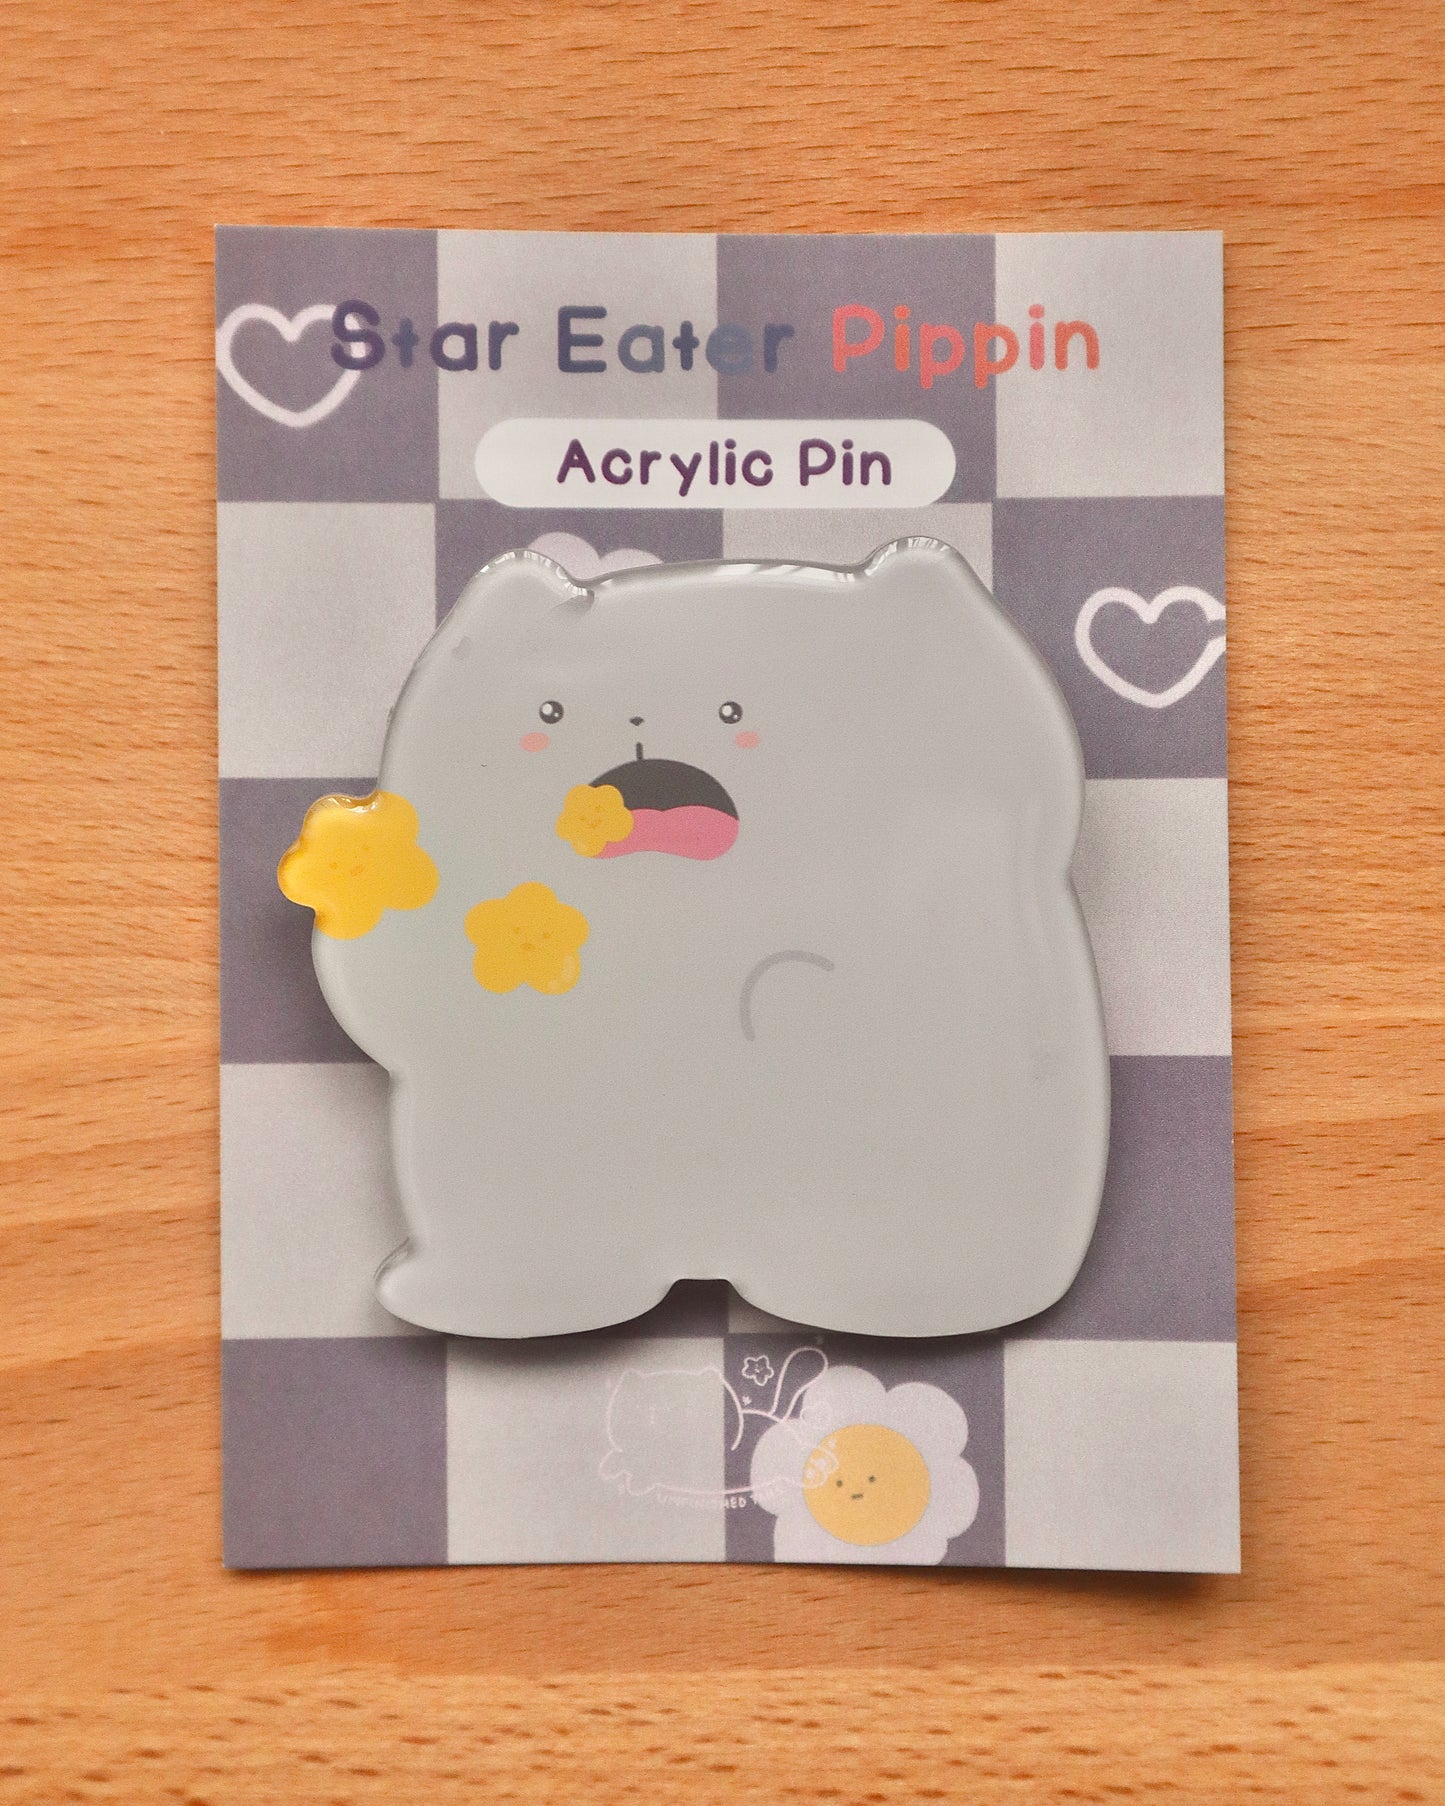 Star Eater Pippin Acrylic Pin